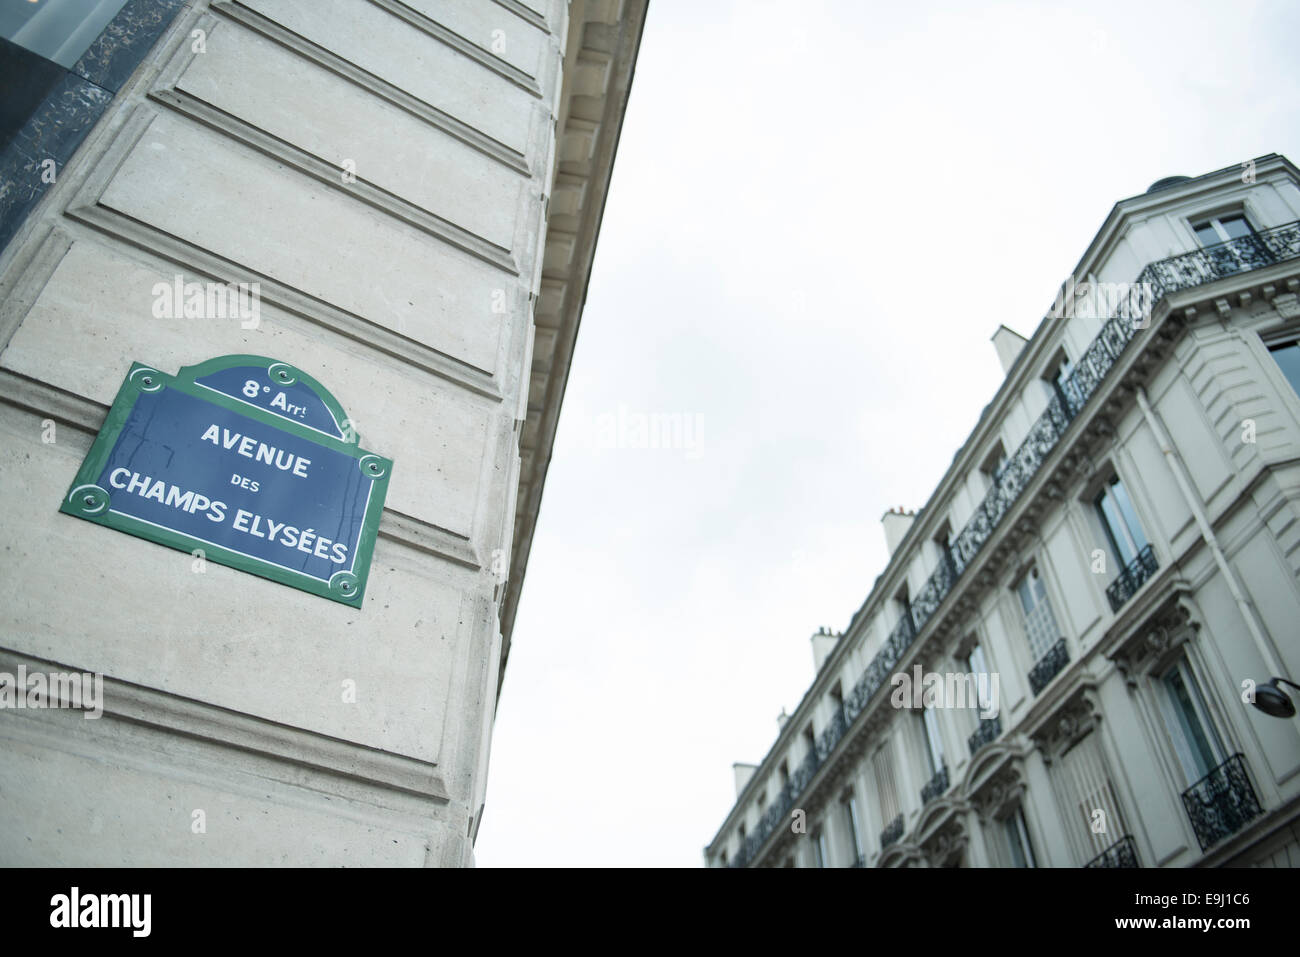 typically french street road name sign posts for the Champs Elysees in Paris on the buildings Stock Photo